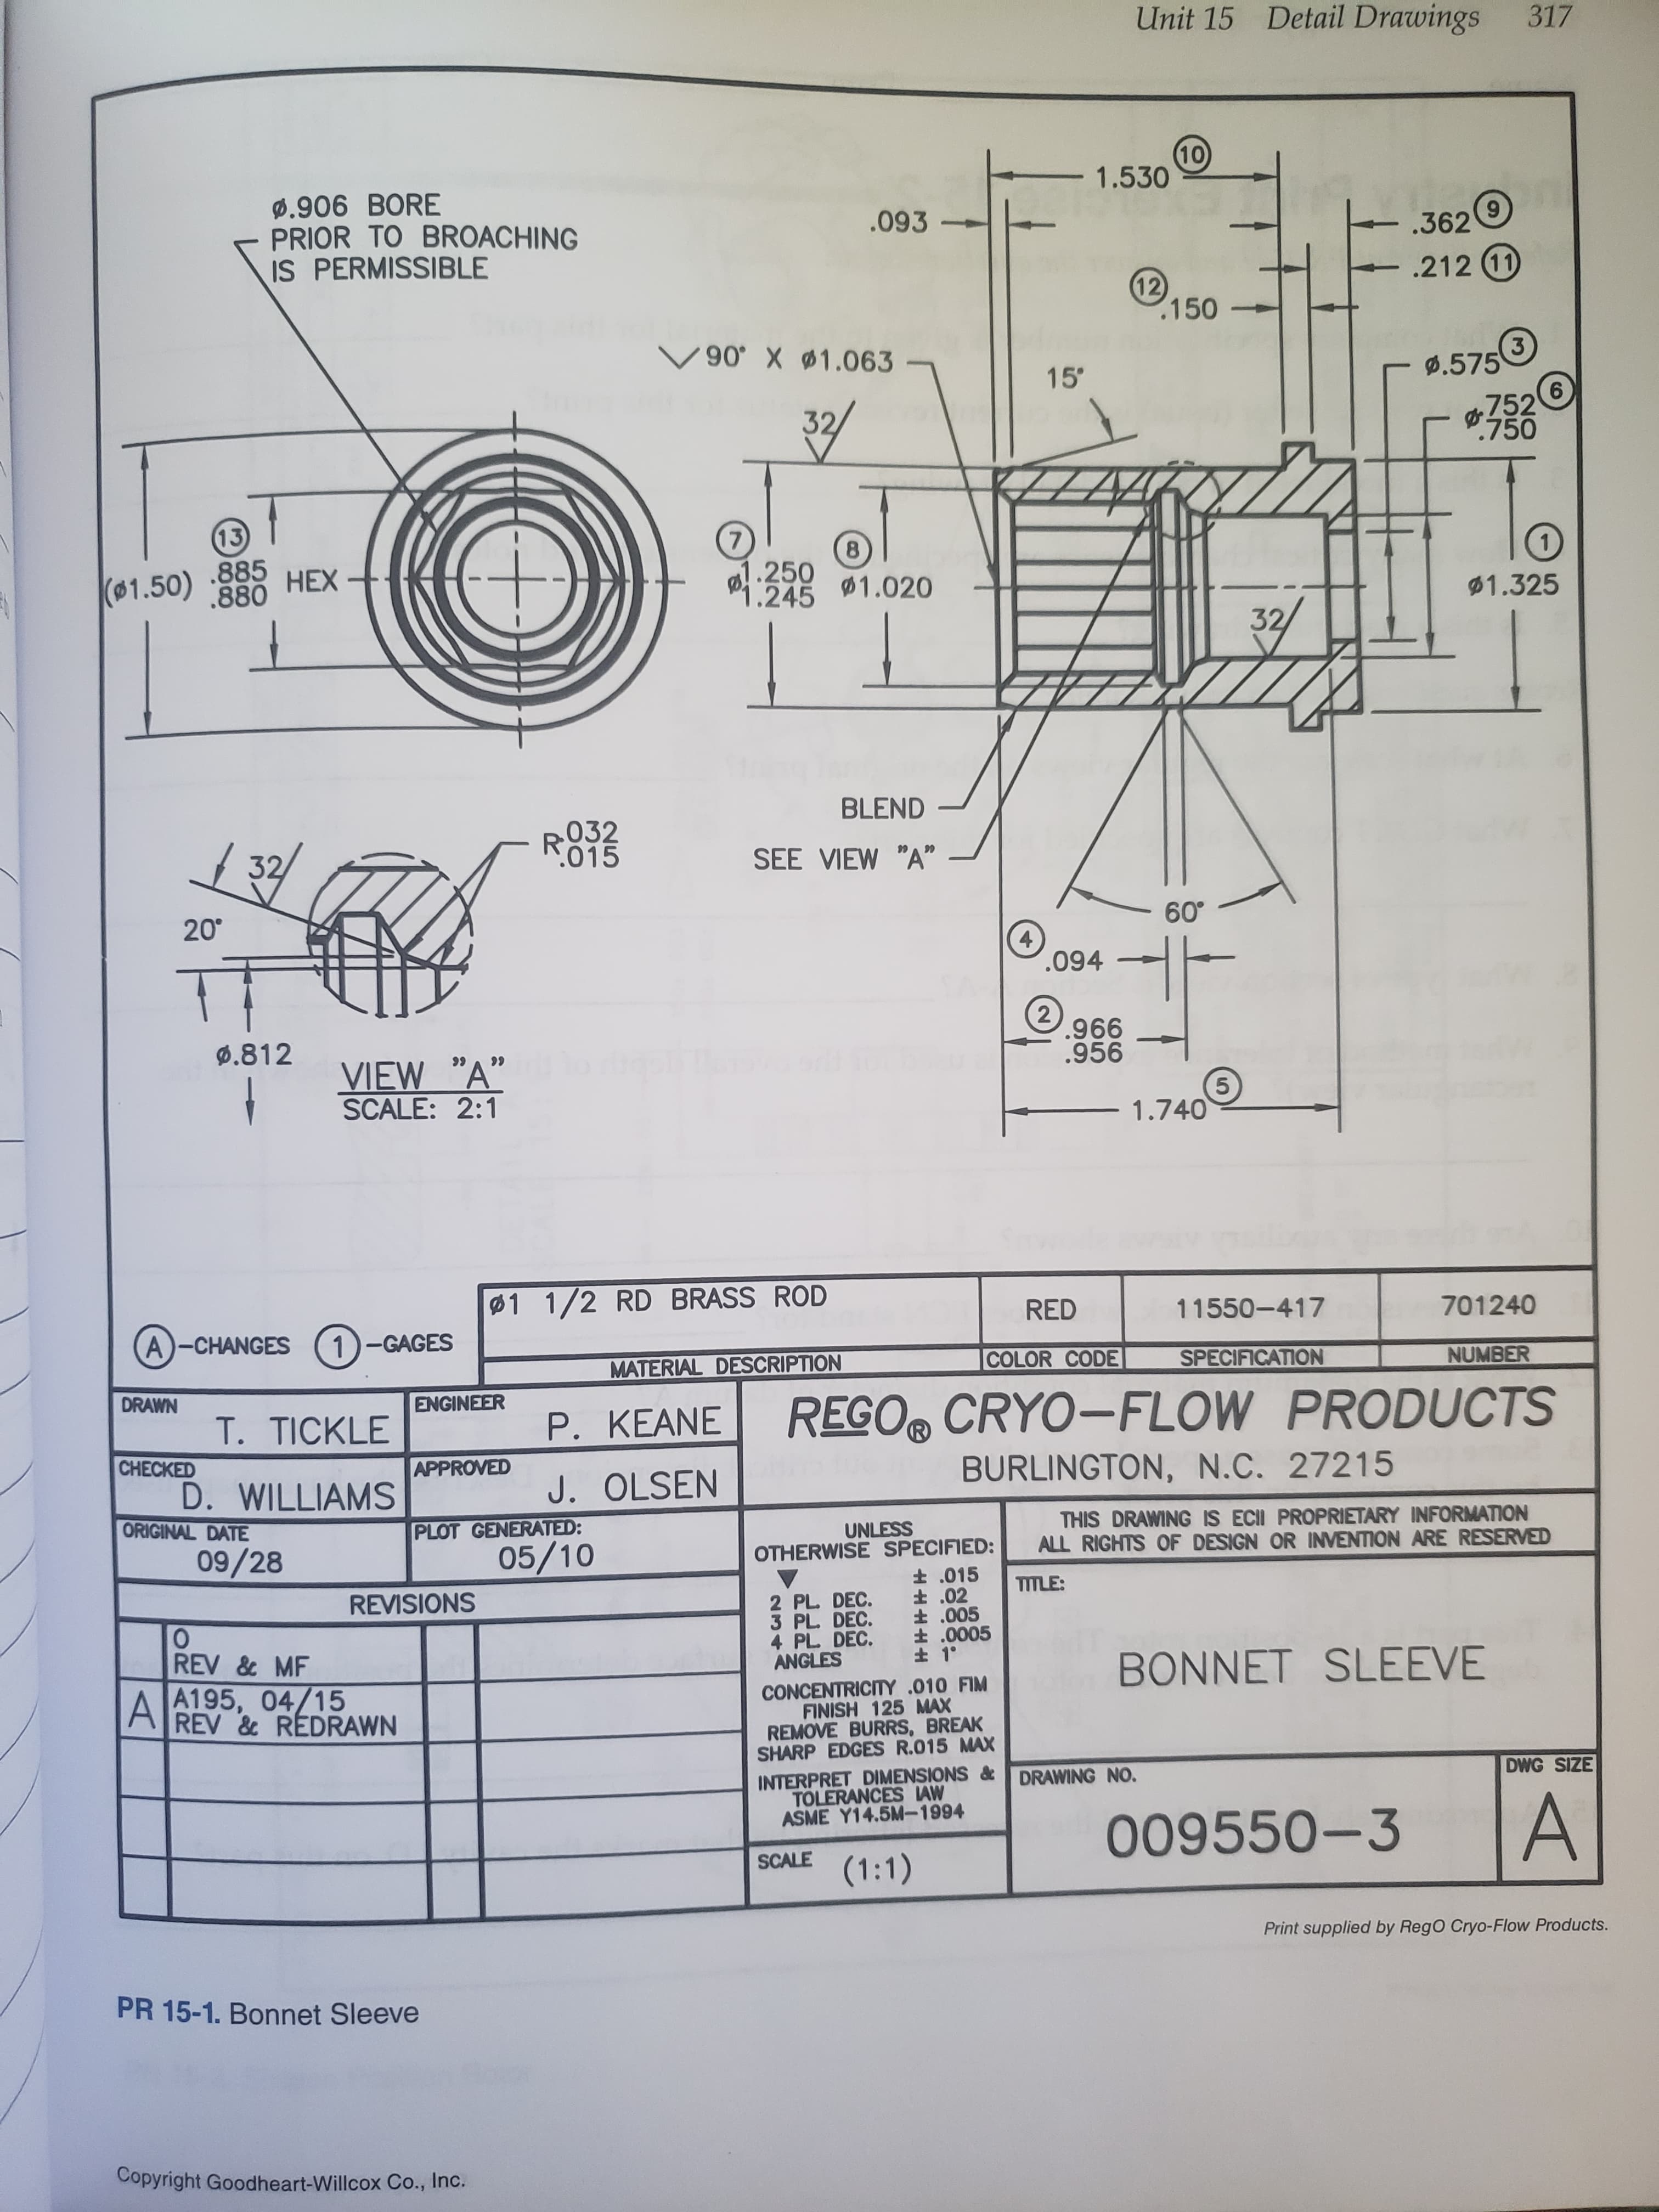 Detail Drawings
Unit 15
317
10
1.530
0.906 BORE
PRIOR TO BROACHING
IS PERMISSIBLE
.093
.362
.212 (11
12
.150
90 X 1.063
3
.575
6
15'
32/
752
.750
13)
7
8
.885
.880
1.250
1.245
НЕХ
(01.50)
1.020
$1.325
32/
BLEND
032
015
SEE VIEW "A"
20°
60°
4
.094
2
.966
.956
.812
dool Tla oooom
VIEW "A"
SCALE: 2:1
99
5
1.740
1 1/2 RD BRASS ROD
RED
11550-417
701240
A-CHANGES
1-GAGES
COLOR CODE
NUMBER
MATERIAL DESCRIPTION
SPECIFICATION
DRAWN
ENGINEER
REGO® CRYO-FLOW PRODUCTS
T. TICKLE
P. KEANE
CHECKED
APPROVED
BURLINGTON, N.C. 27215
D. WILLIAMS
J. OLSEN
ORIGINAL DATE
PLOT GENERATED:
THIS DRAWING IS ECII PROPRIETARY INFORMATION
ALL RIGHTS OF DESIGN OR INVENTION ARE RESERVED
UNLESS
OTHERWISE SPECIFIED:
05/10
09/28
t 015
t 02
t .005
t .0005
t 1°
TITLE:
REVISIONS
2 PL. DEC.
3 PL DEC.
4 PL DEC.
ANGLES
REV & MF
BONNET SLEEVE
A195, 04/15
REV&REDRAWN
A
CONCENTRICITY .010 FIM
FINISH 125 MAX
REMOVE BURRS, BREAK
SHARP EDGES R.015 MAX
INTERPRET DIMENSIONS &
TOLERANCES AW
ASME Y14.5M-1994
DWG SIZE
DRAWING NO
A
009550-3
SCALE
(1:1)
Print supplied by RegO Cryo-Flow Products.
PR 15-1. Bonnet Sleeve
Copyright Goodheart-Willcox Co., Inc.
